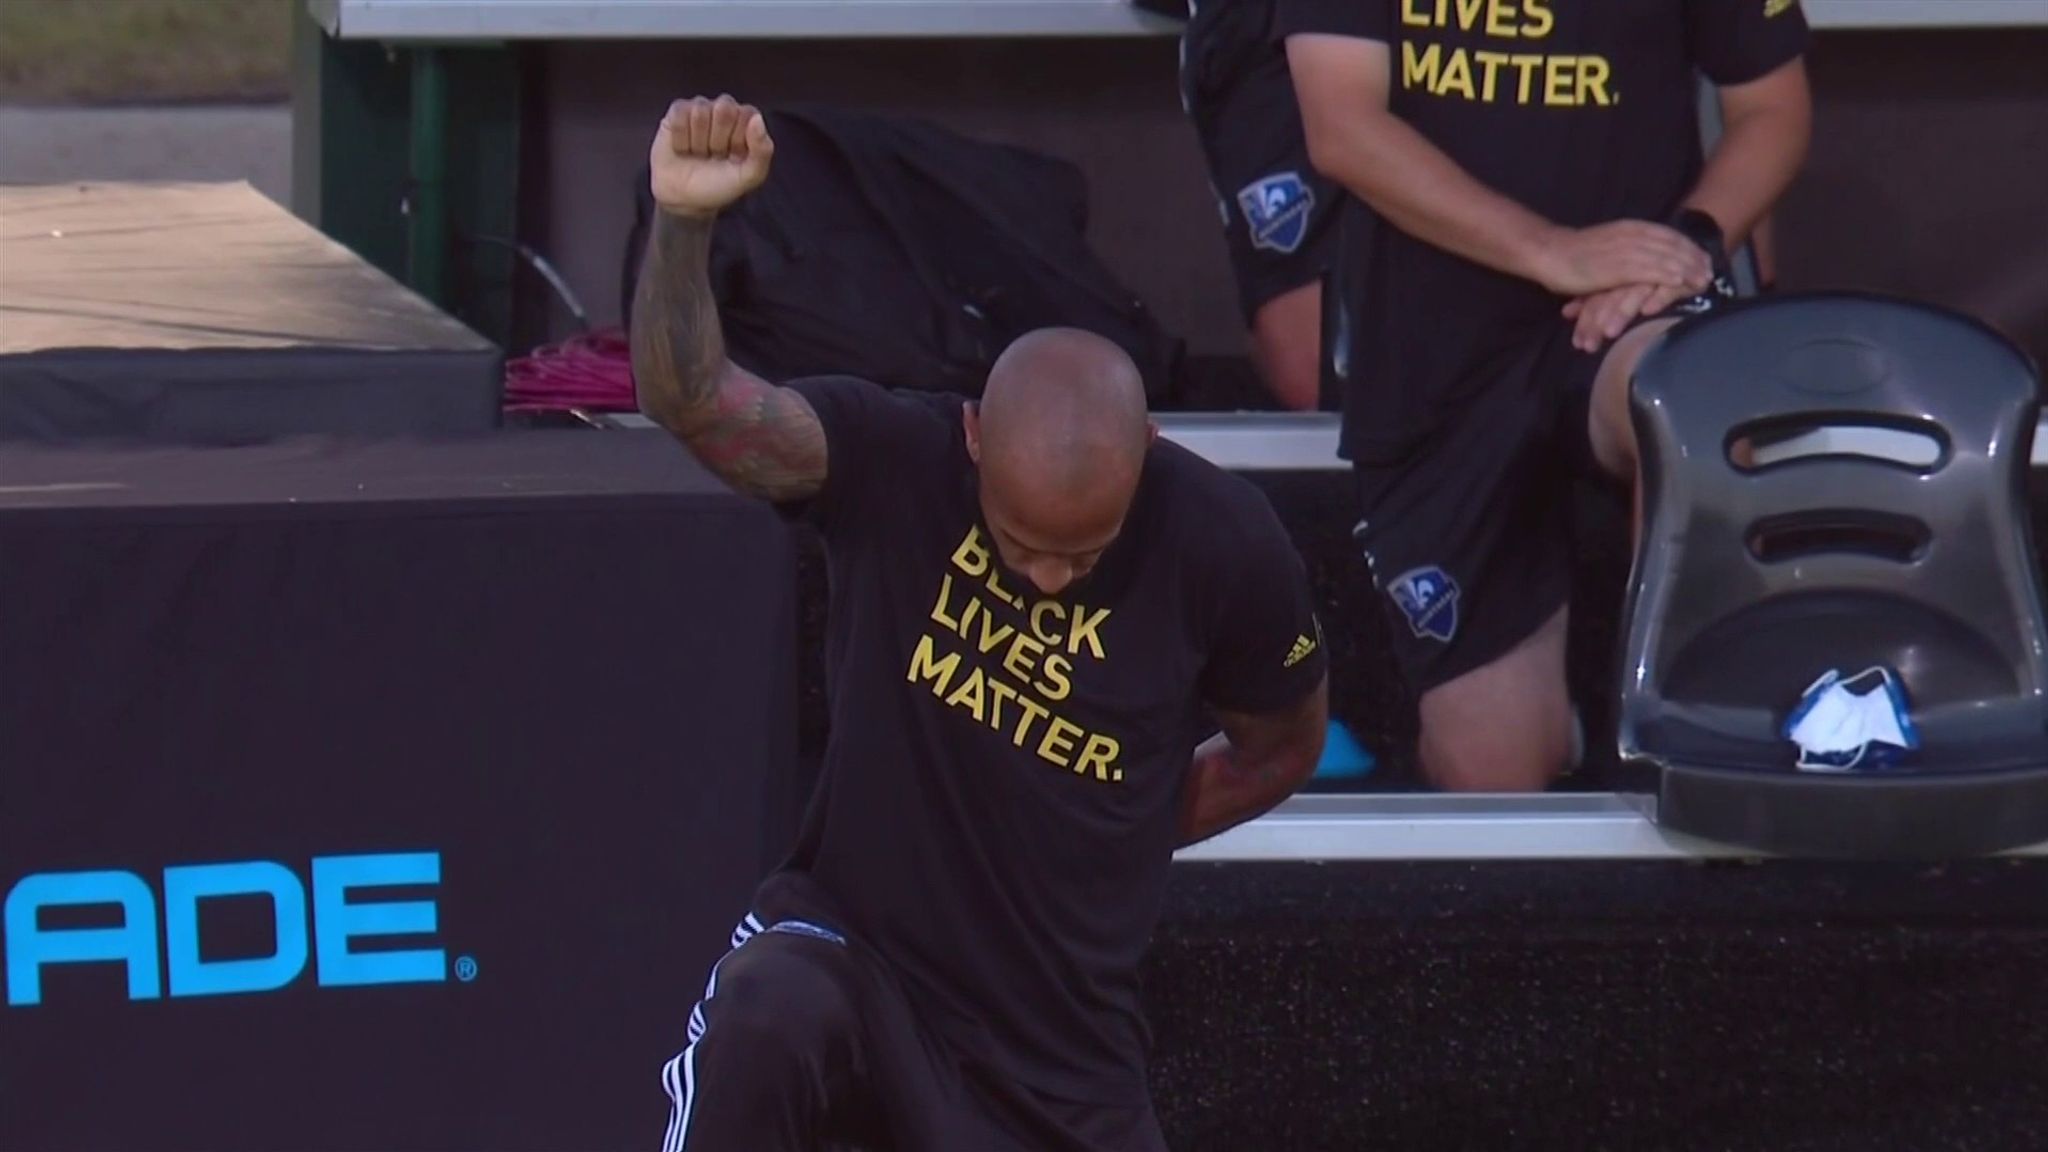 Black Lives Matter: Thierry Henry takes a knee for 8mins 46secs | Football  News | Sky Sports